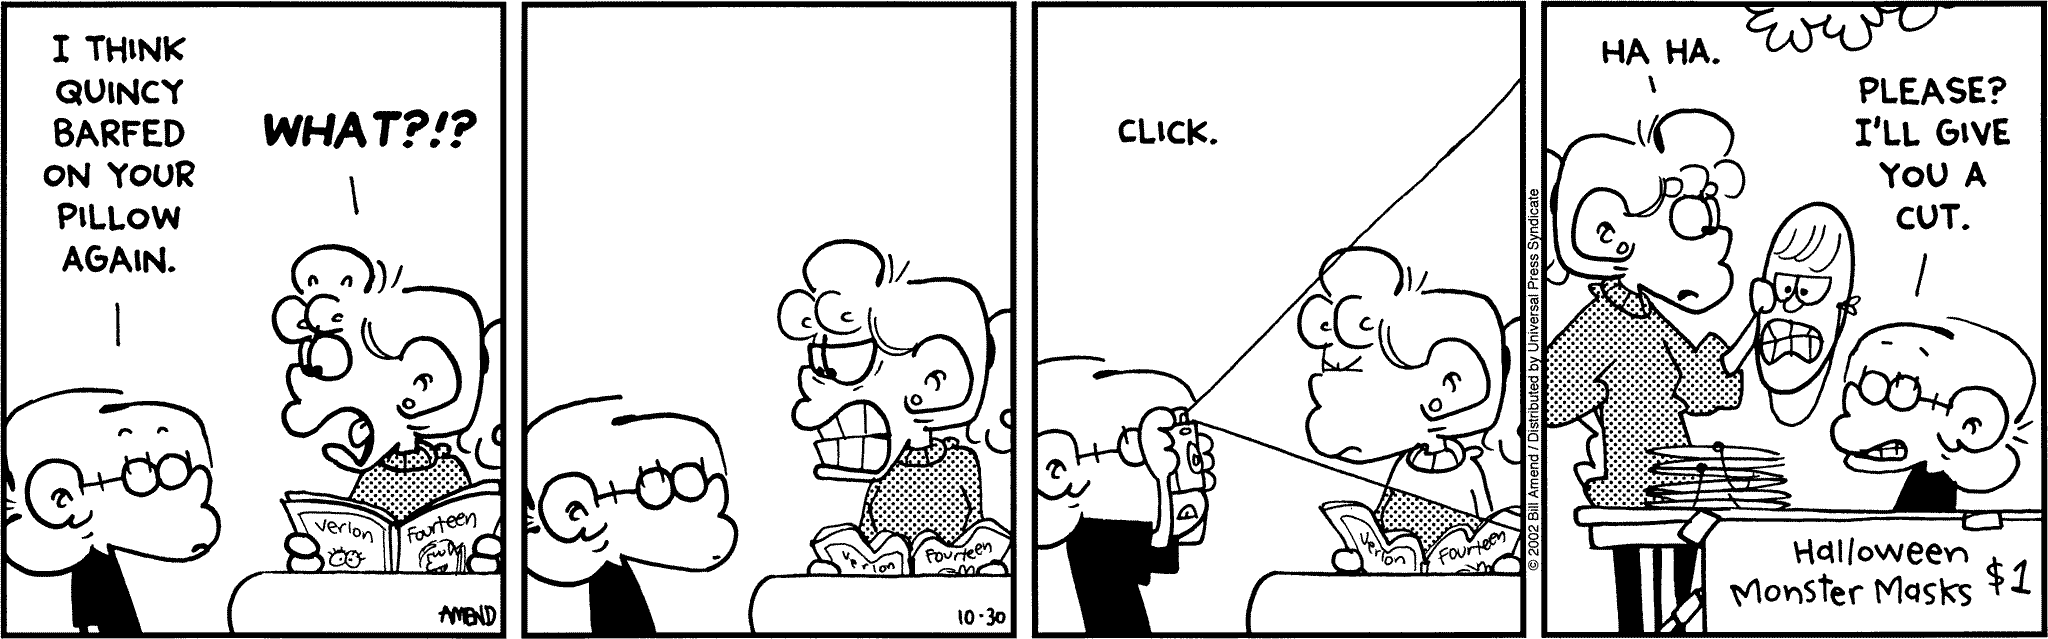 "FoxTrot comic strip by Bill Amend - Published October 30, 2002  - Jason Fox: I think Quincy barfed on your pillow again. Paige Fox: What?! Ha, ha. Jason Fox: Please? I'll give you a cut."